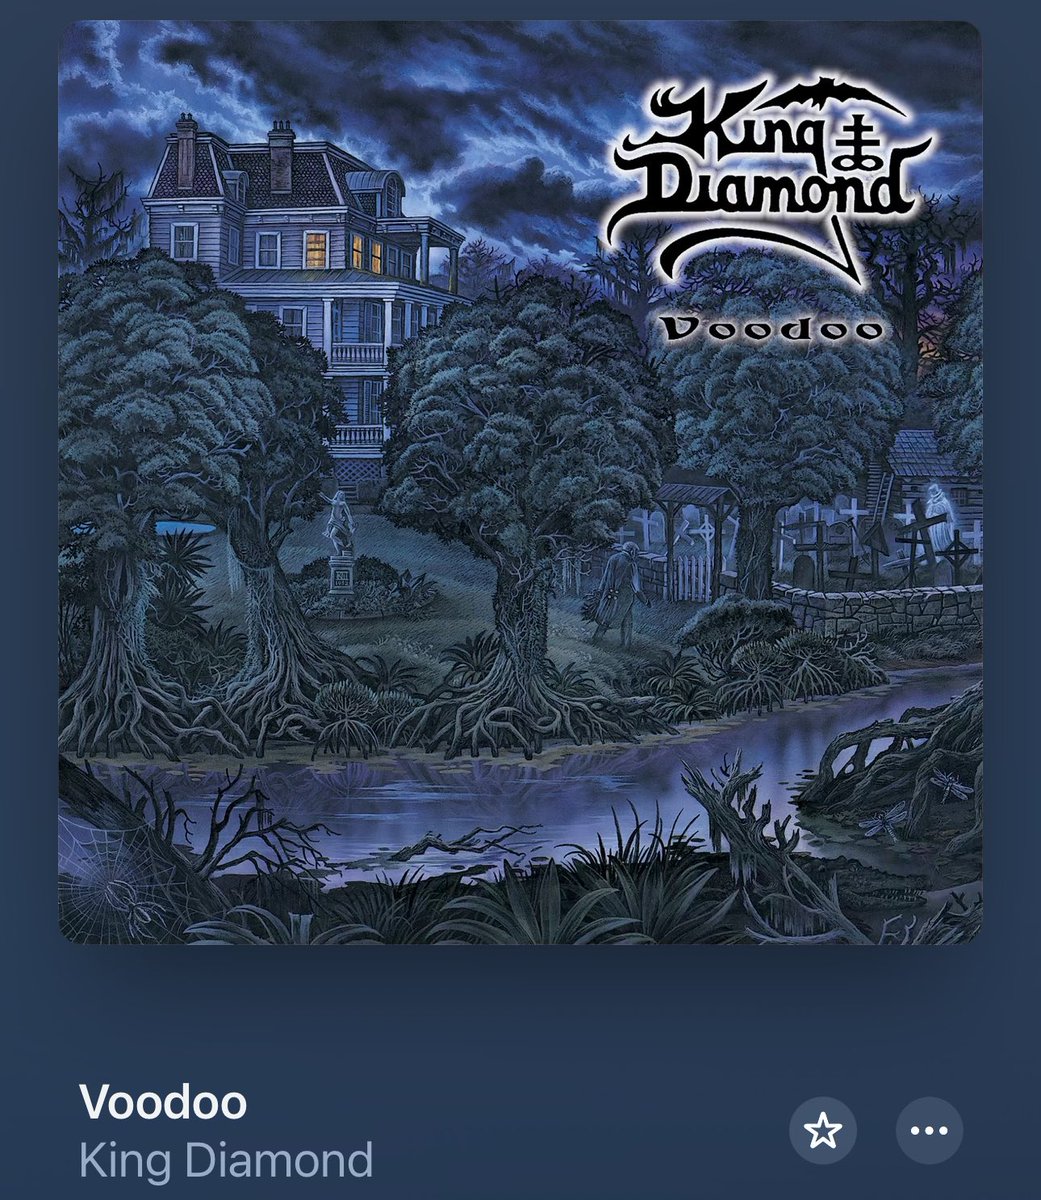 King Diamond, ‘Voodoo’ the song and the album.

Nice little solo courtesy of Pantera’s Dinebag Darrell!

Love the island style percussion throughout too…not common in metal!

‘Voodoo!!!!’

#KingDiamond #DimebagDarrell